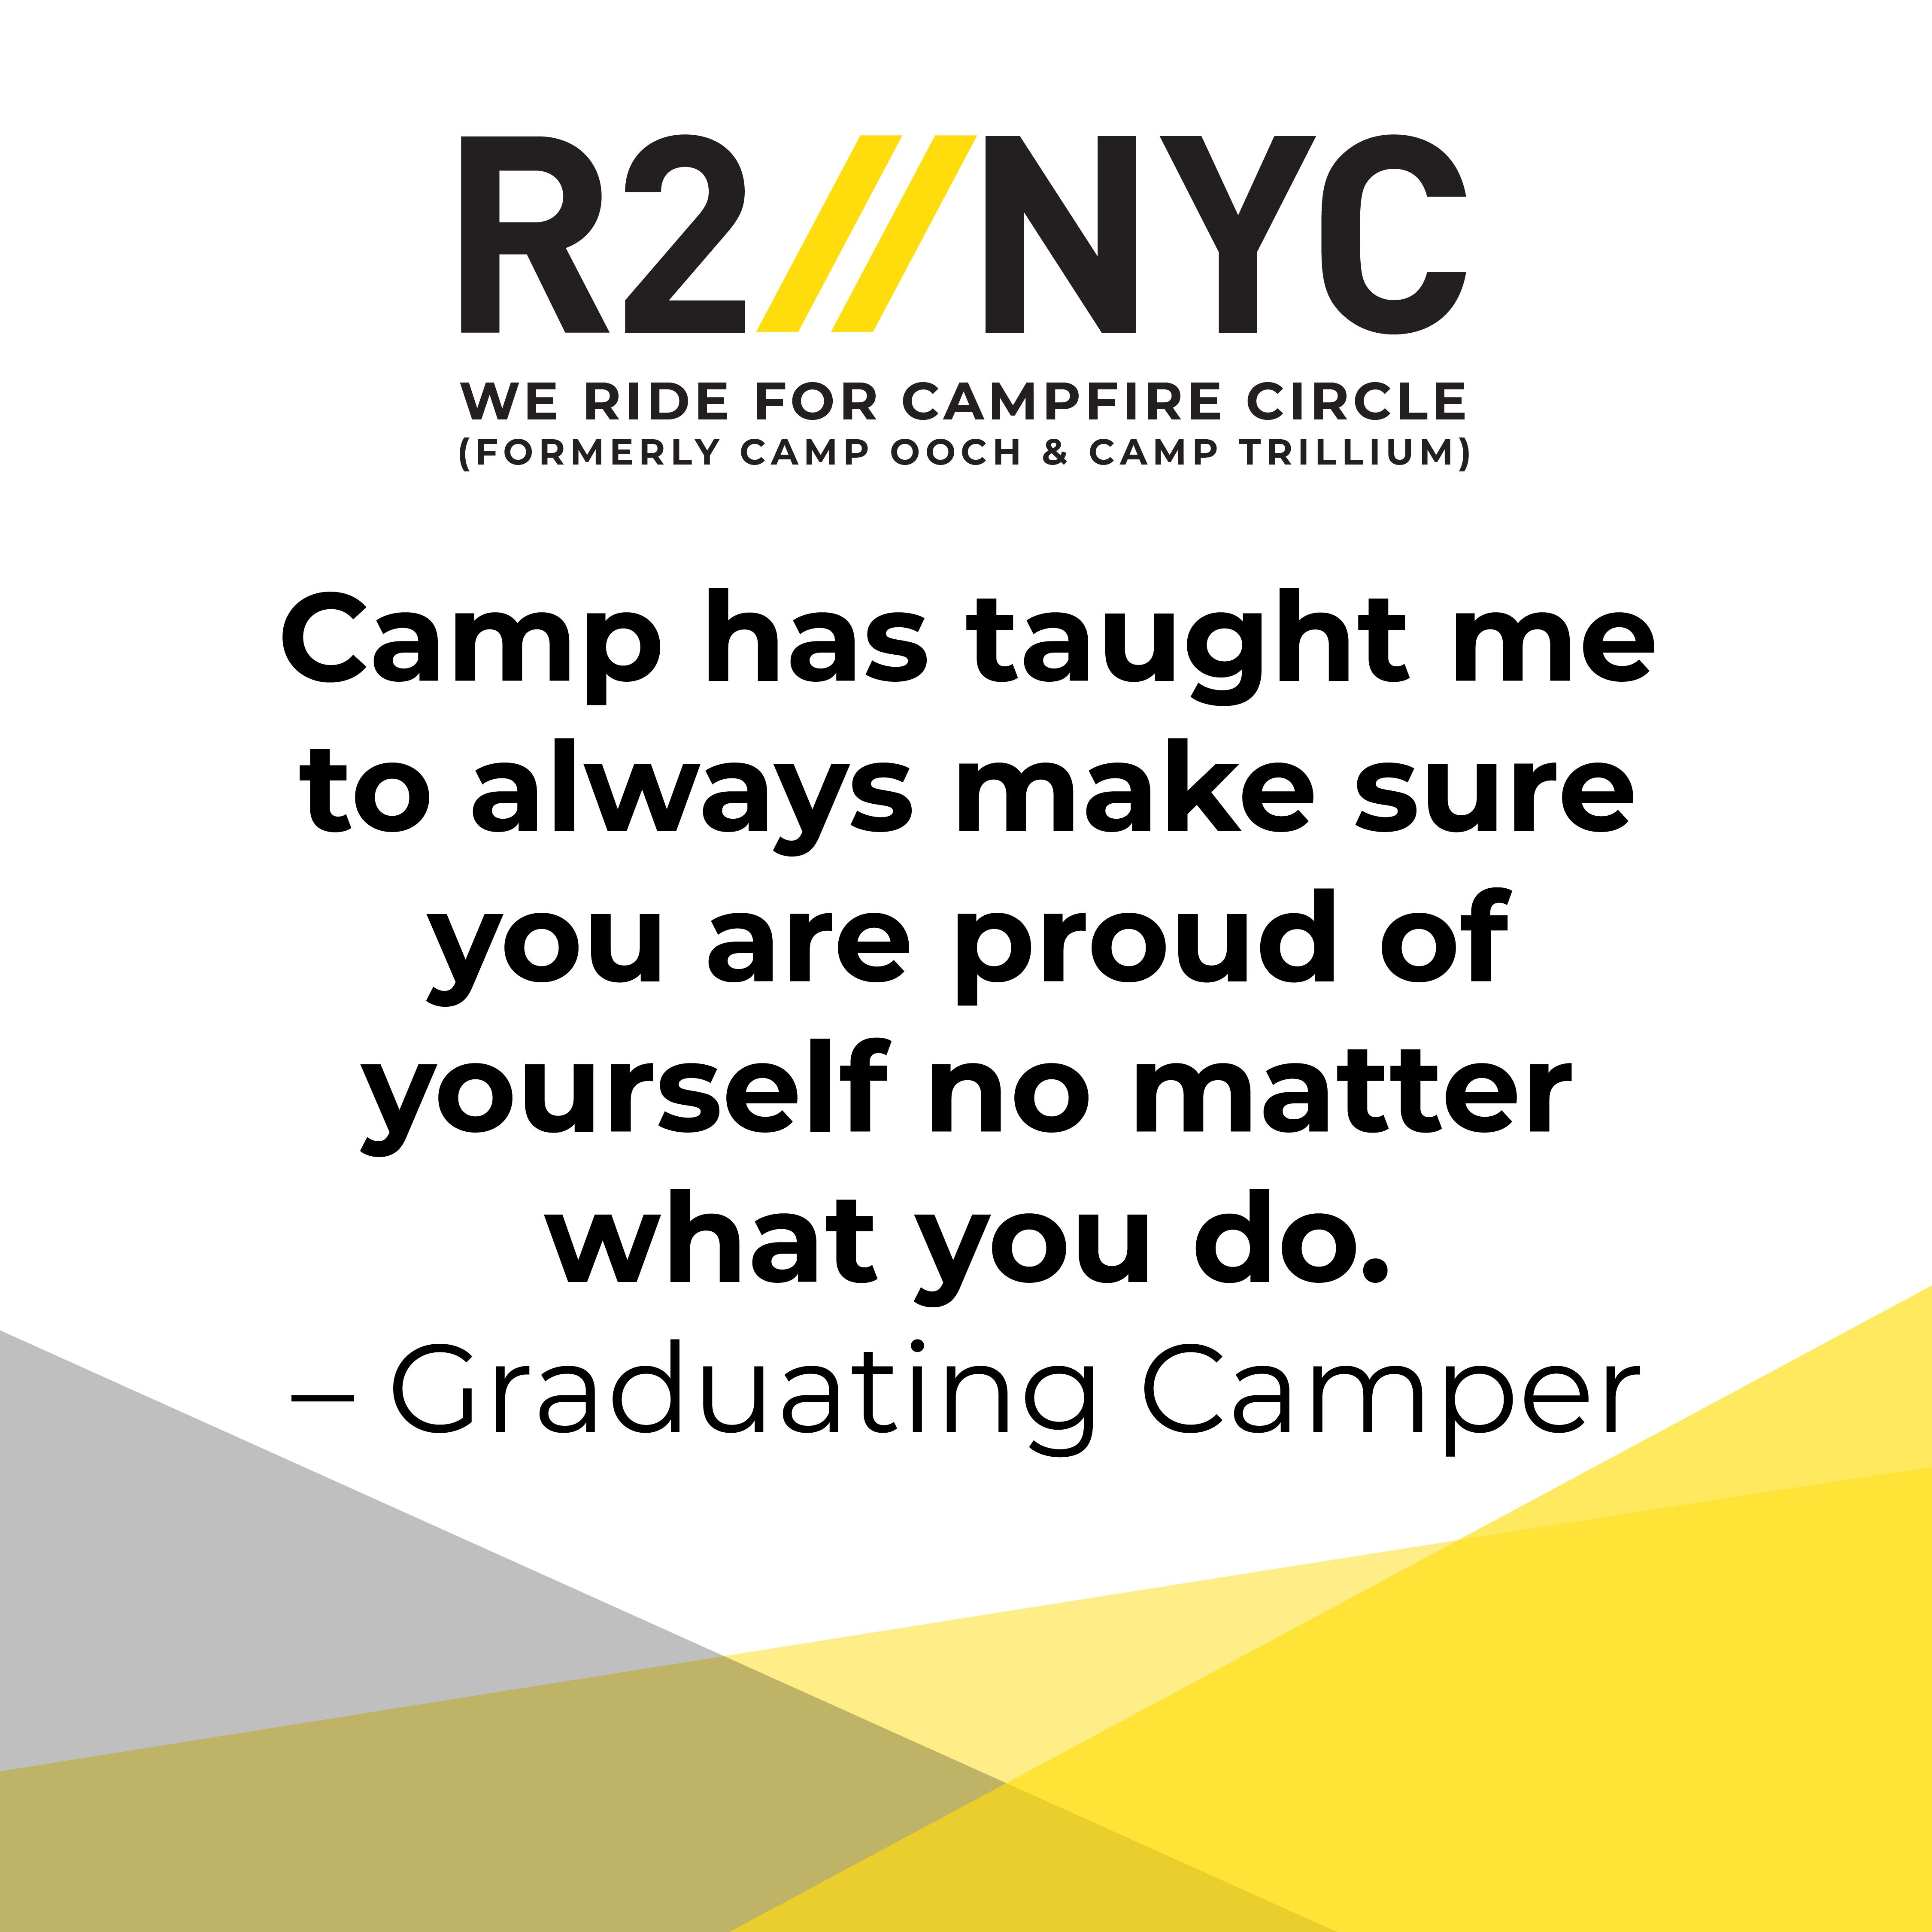 R2NYC Camp has taught me to always make sure you are proud of yourself no matter what you do.